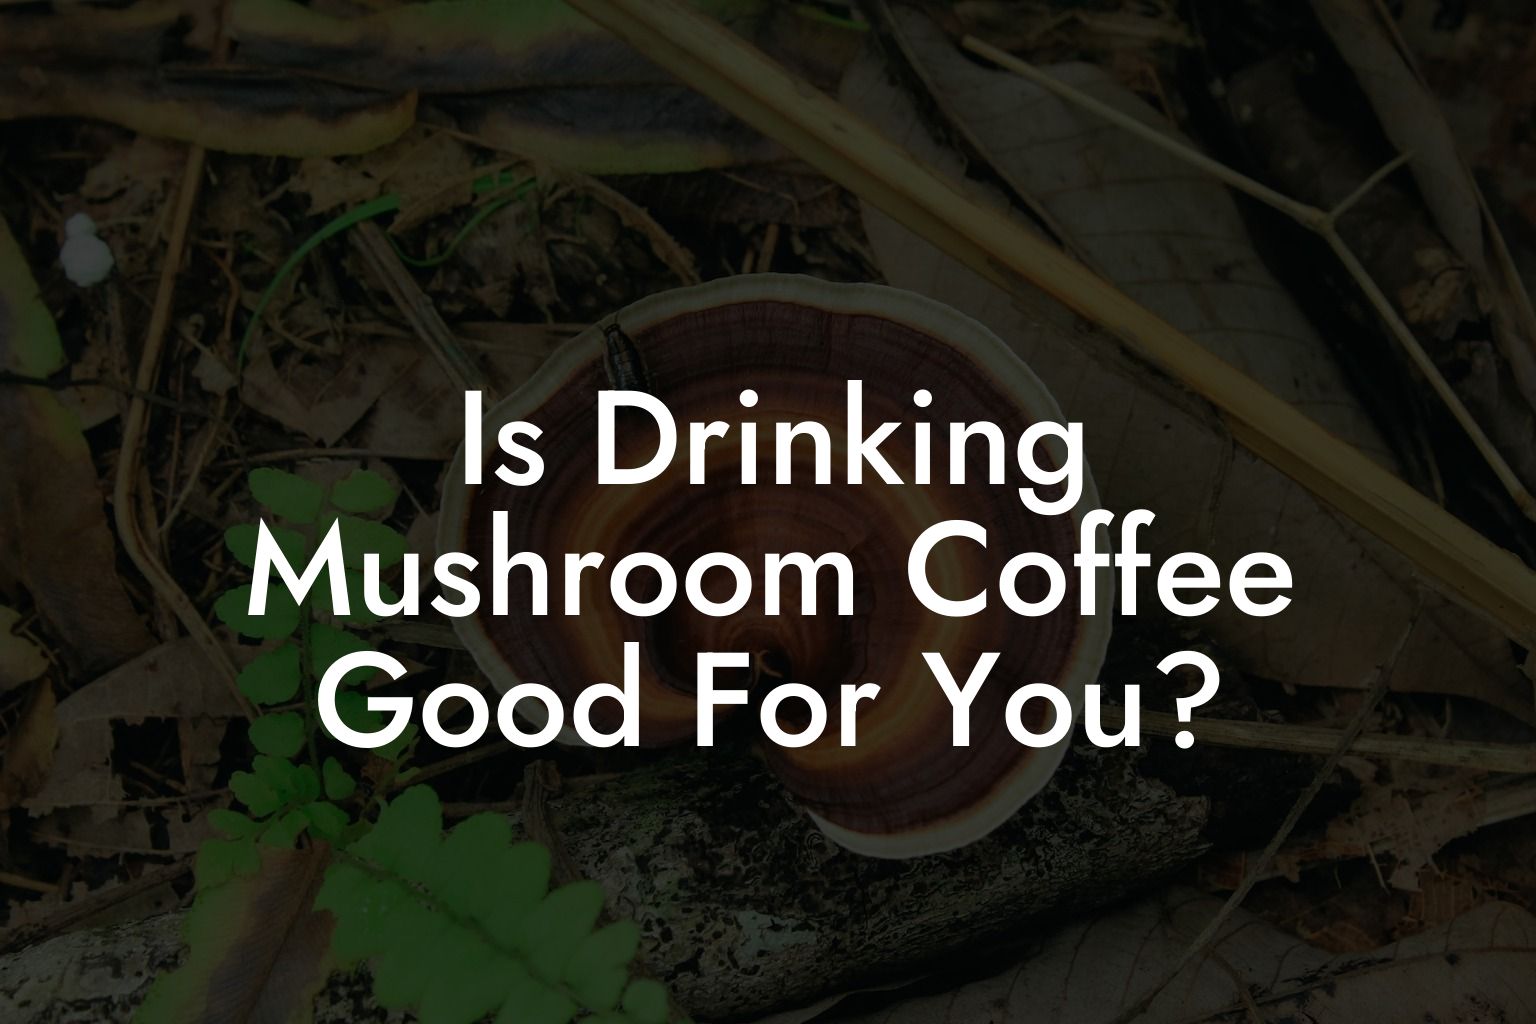 Is Drinking Mushroom Coffee Good For You?